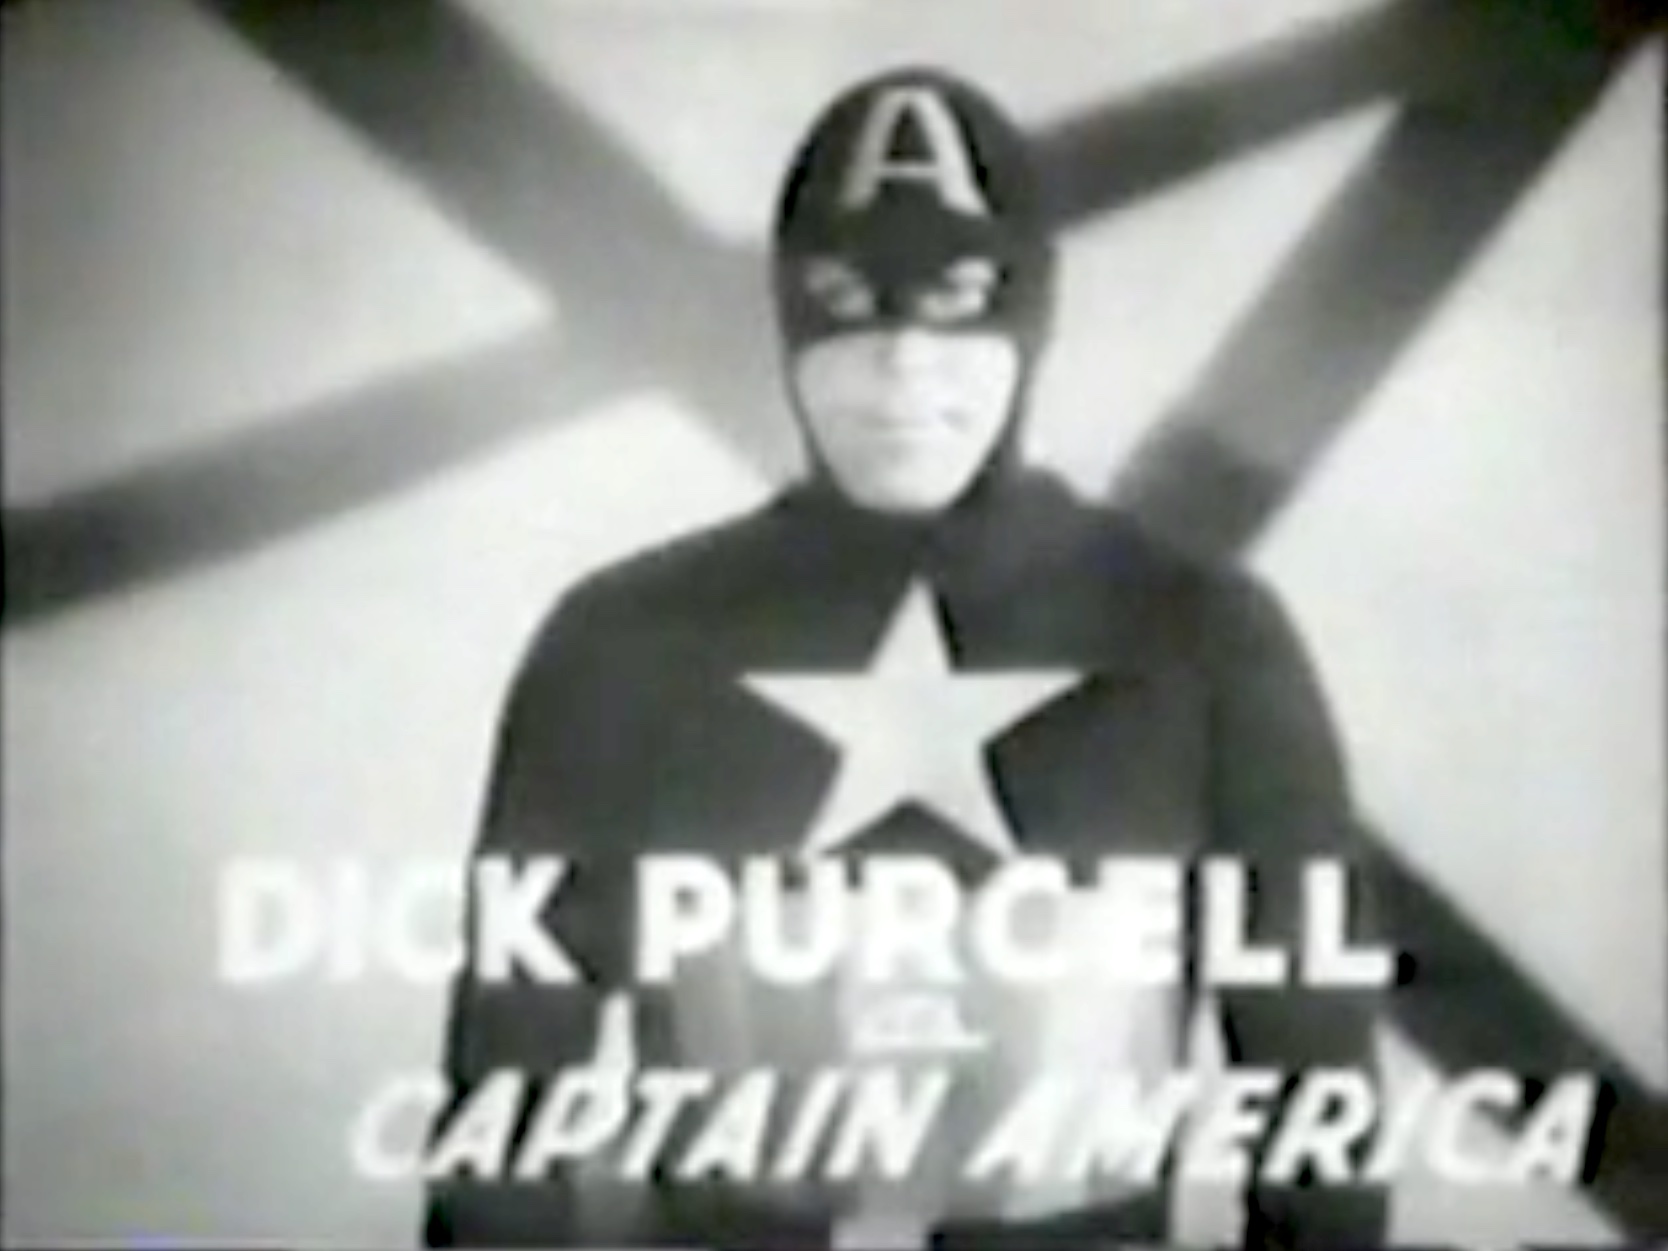 Dick Purcell as Captain America